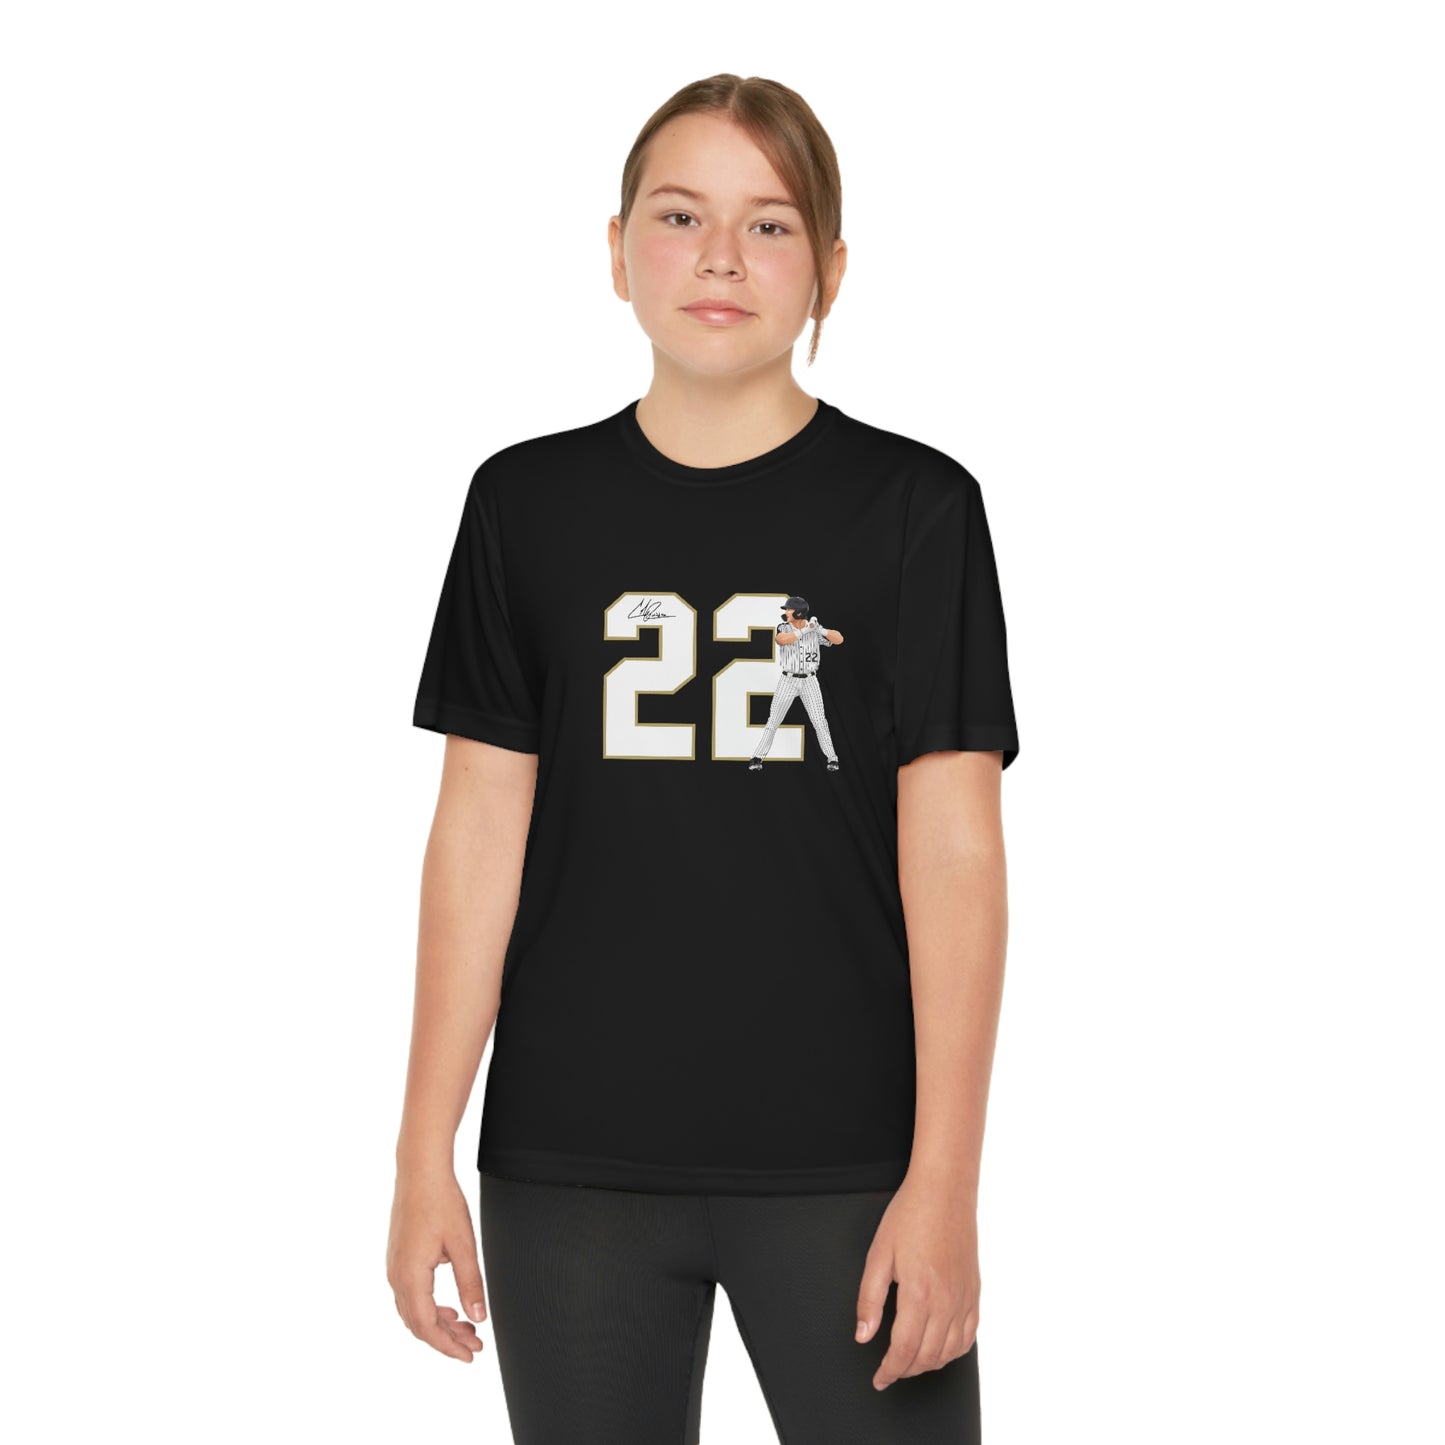 Cole Russo YOUTH Performance Shirt